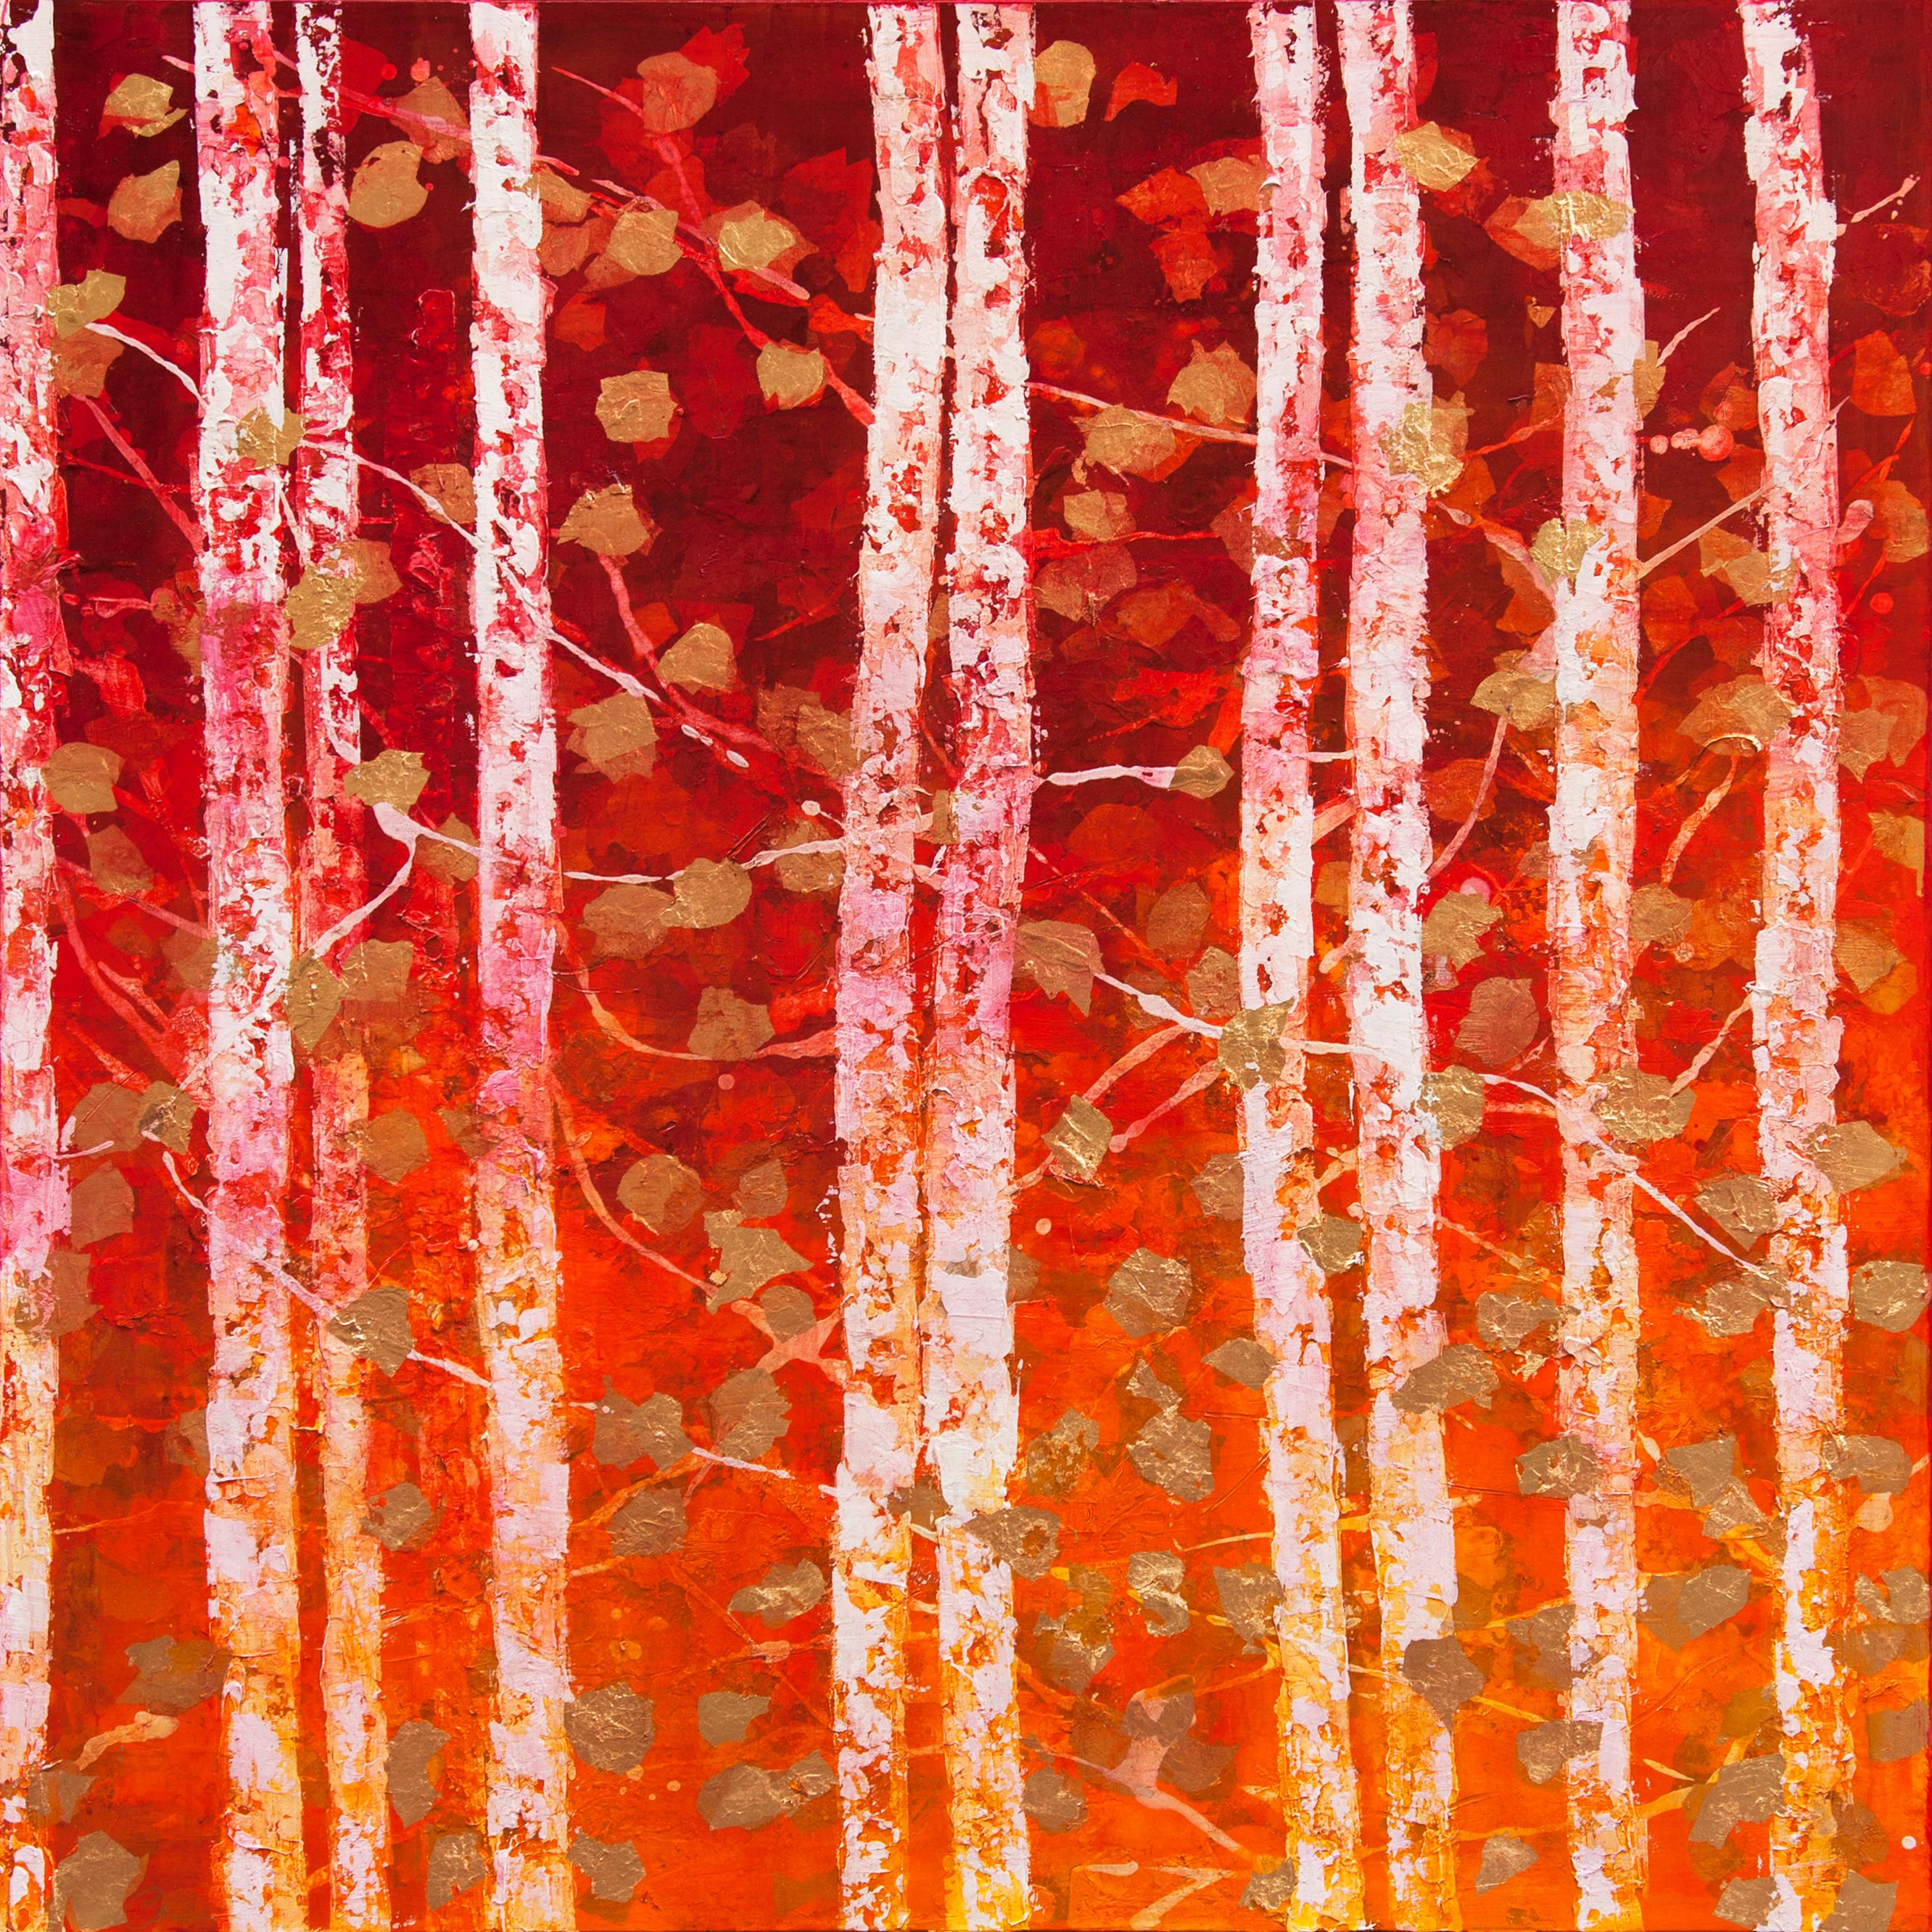 Golden Forest - 21st Century, Contemporary, Abstract Painting, Oil, Gold Leaf - Mixed Media Art by Chelsea Davine